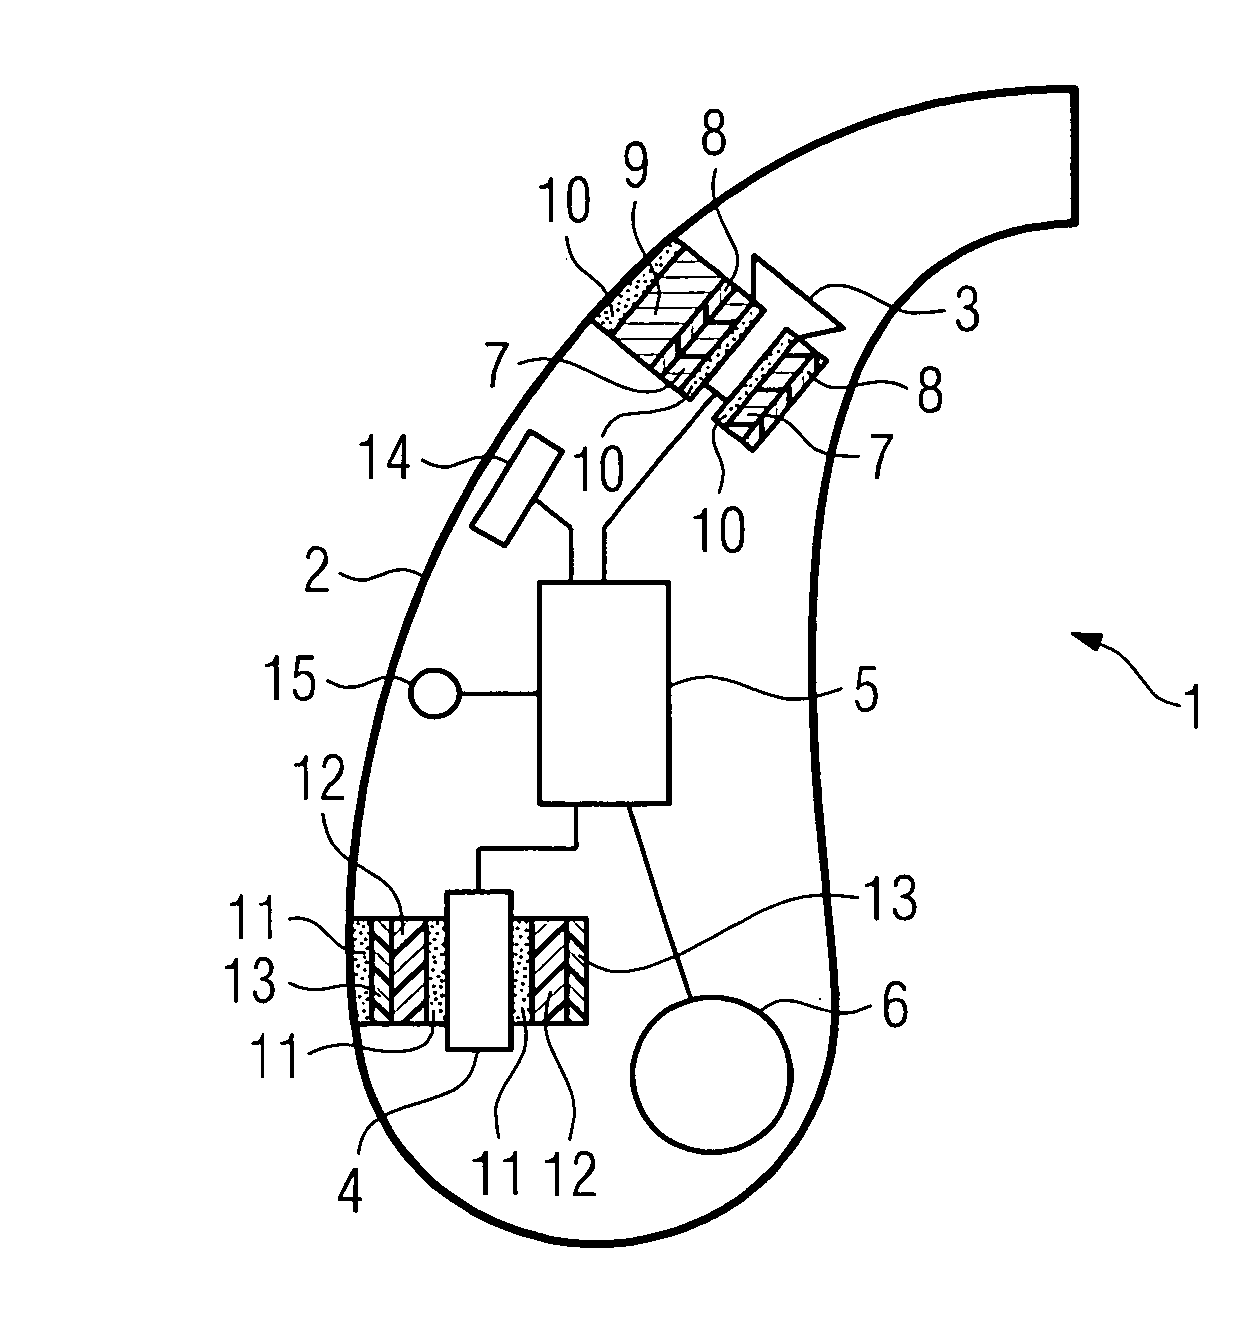 Hearing aid with an attenuation element